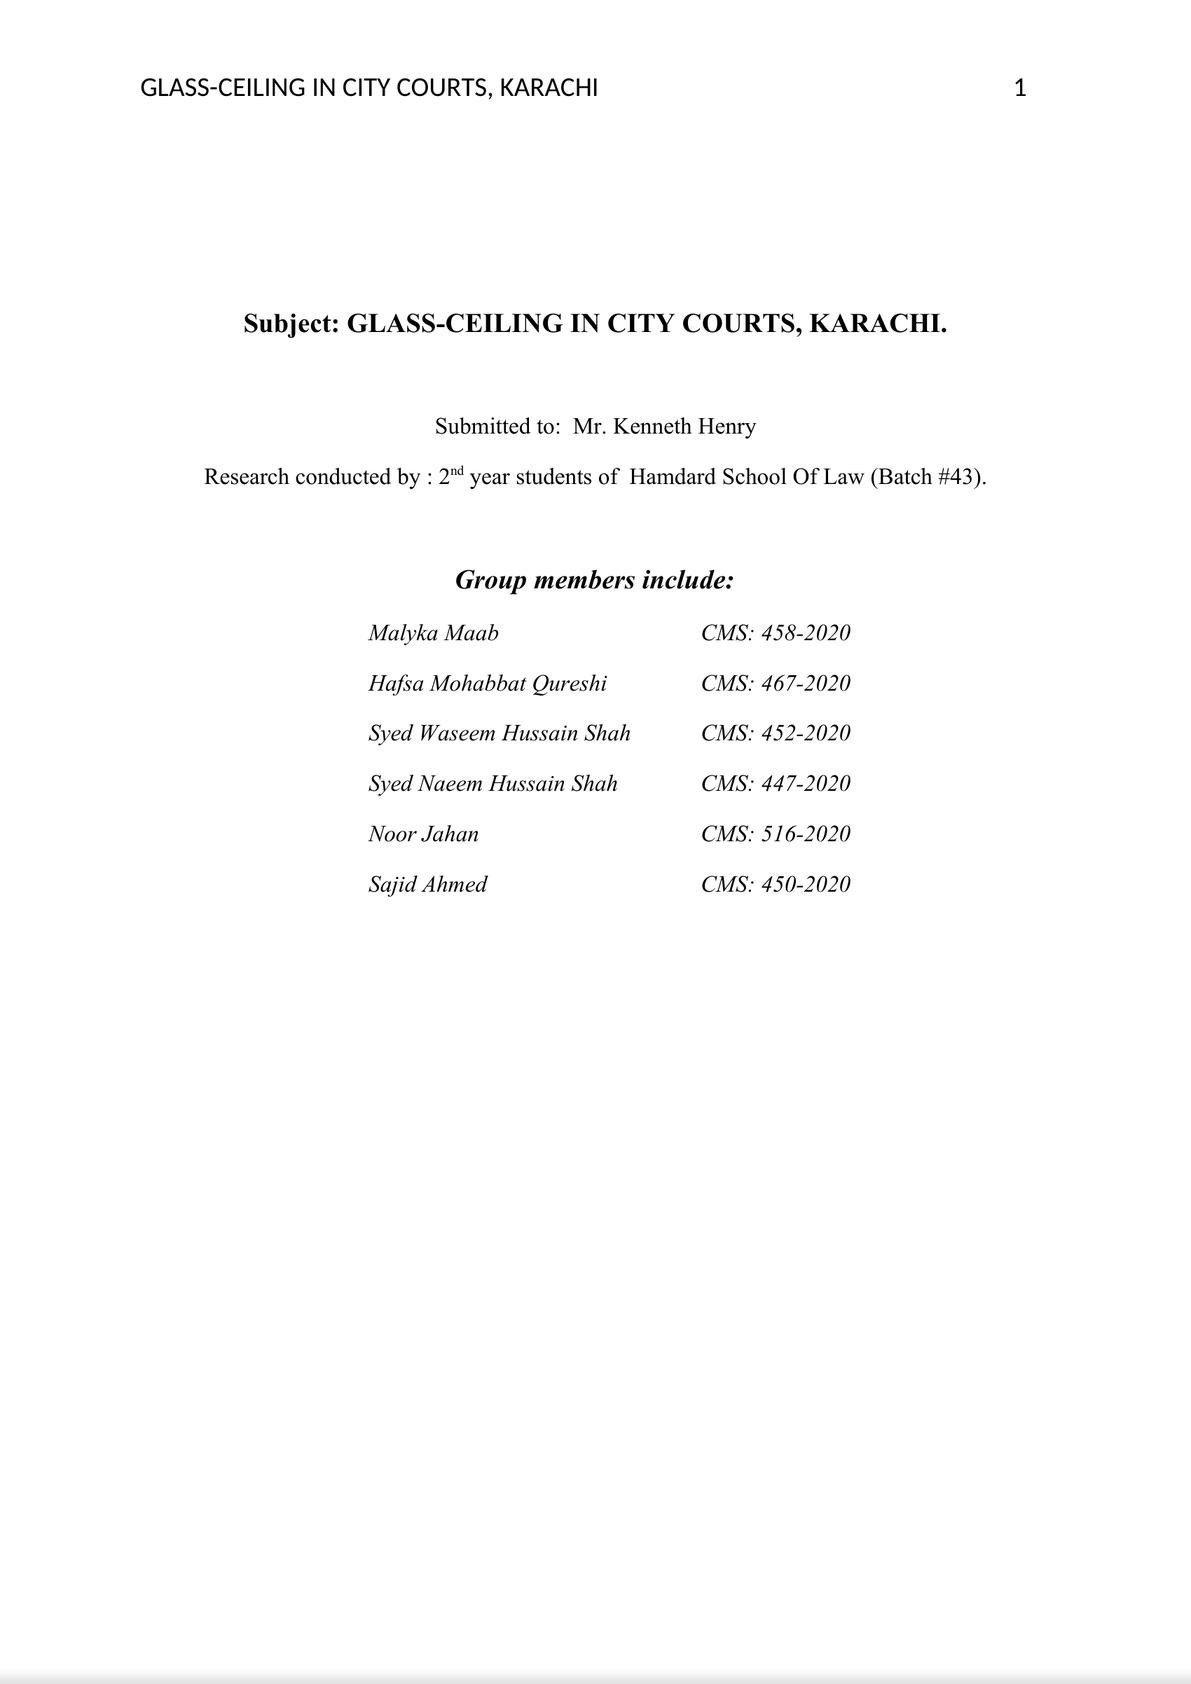 Research Paper - Existence of Glass-Ceiling in City Courts, Karachi-1